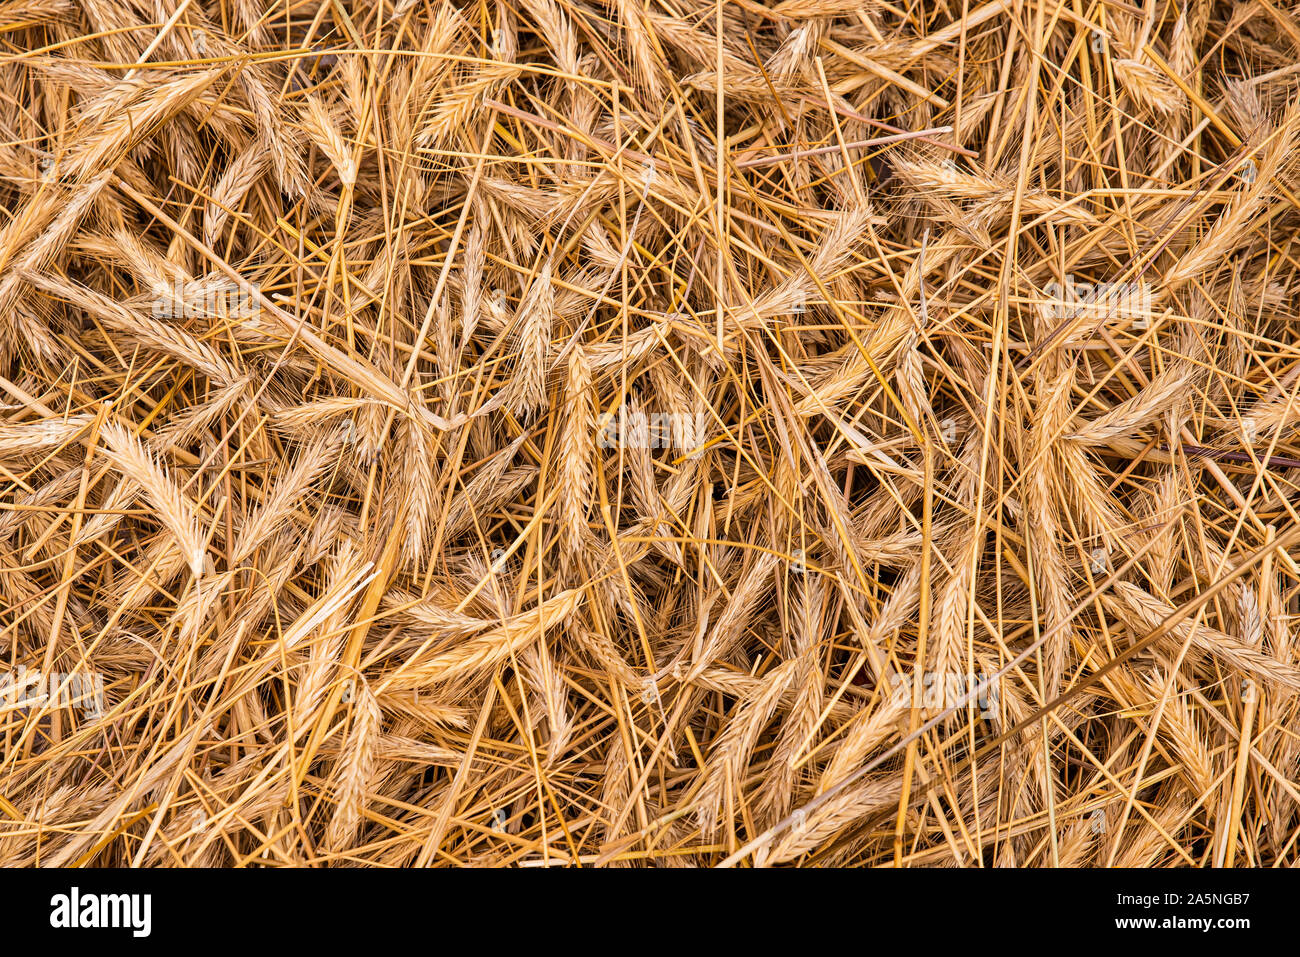 background of ears of dried wheat Stock Photo